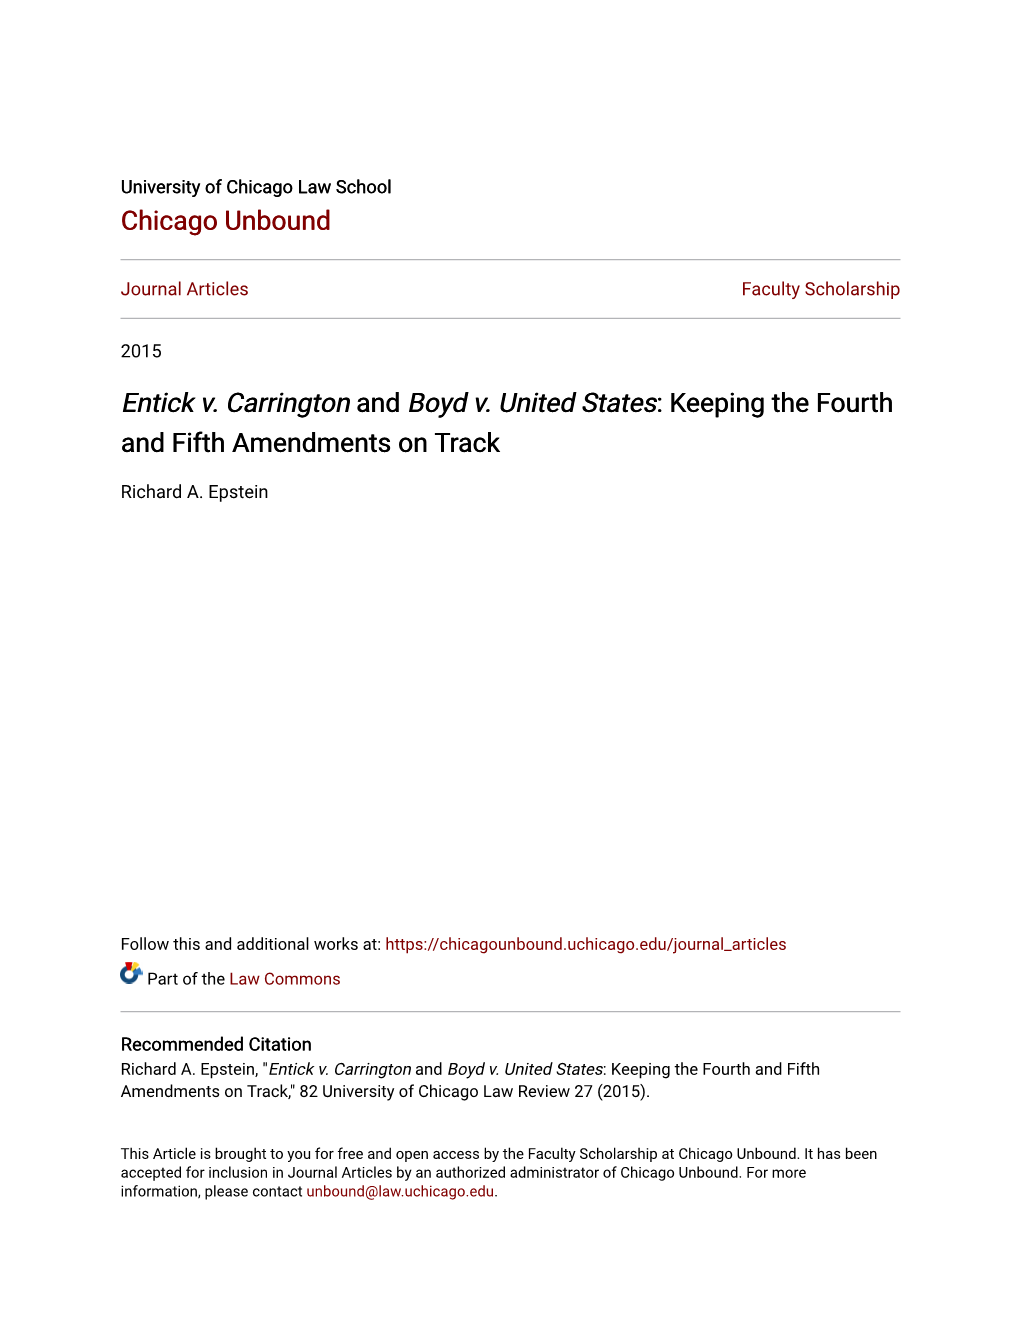 Entick V. Carrington and Boyd V. United States: Keeping the Fourth and Fifth Amendments on Track